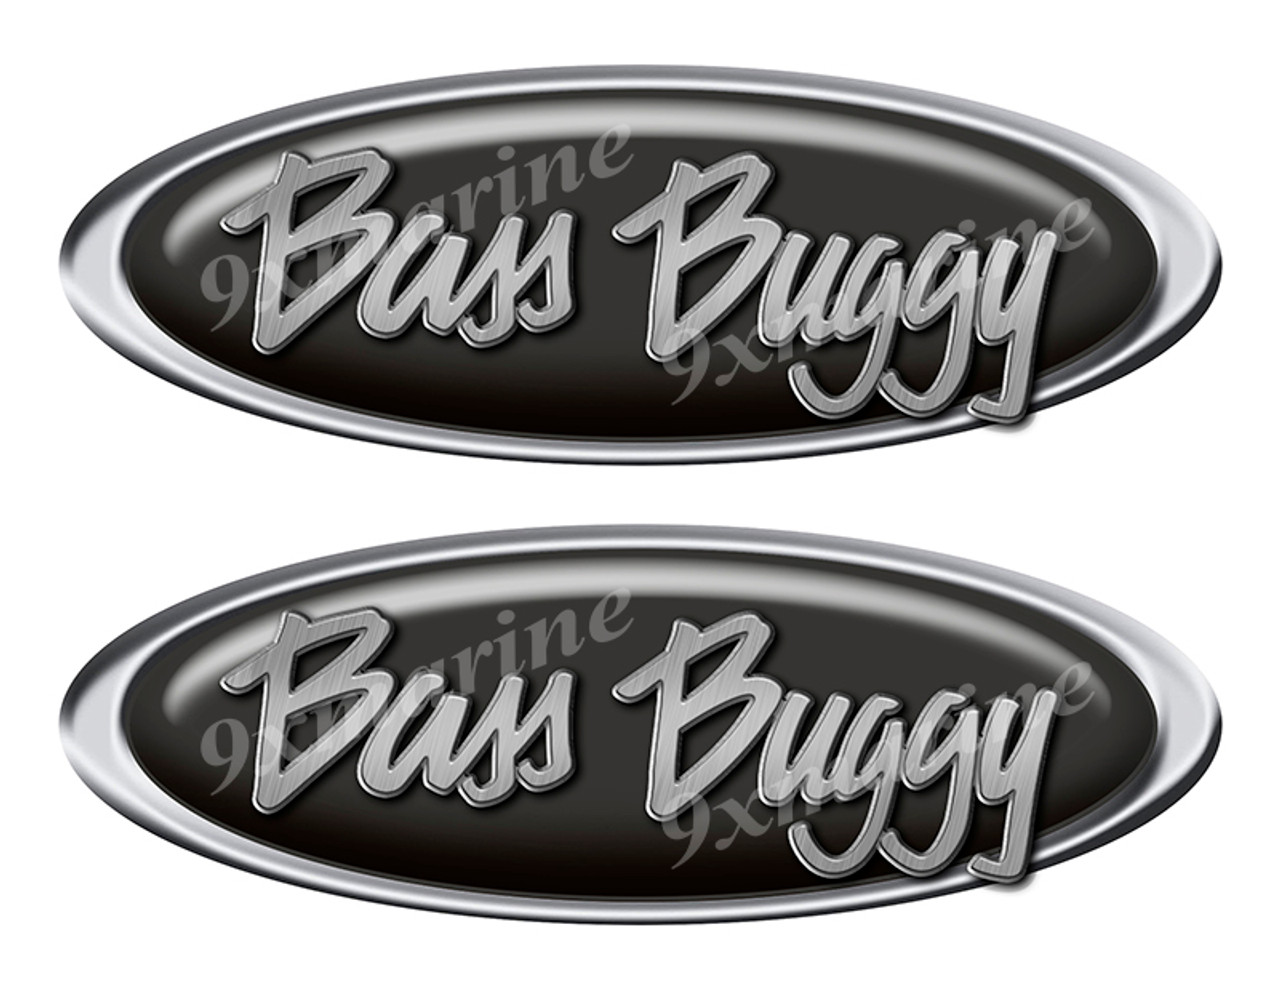 Two Bass Buggy Classic Oval Stickers 10" long